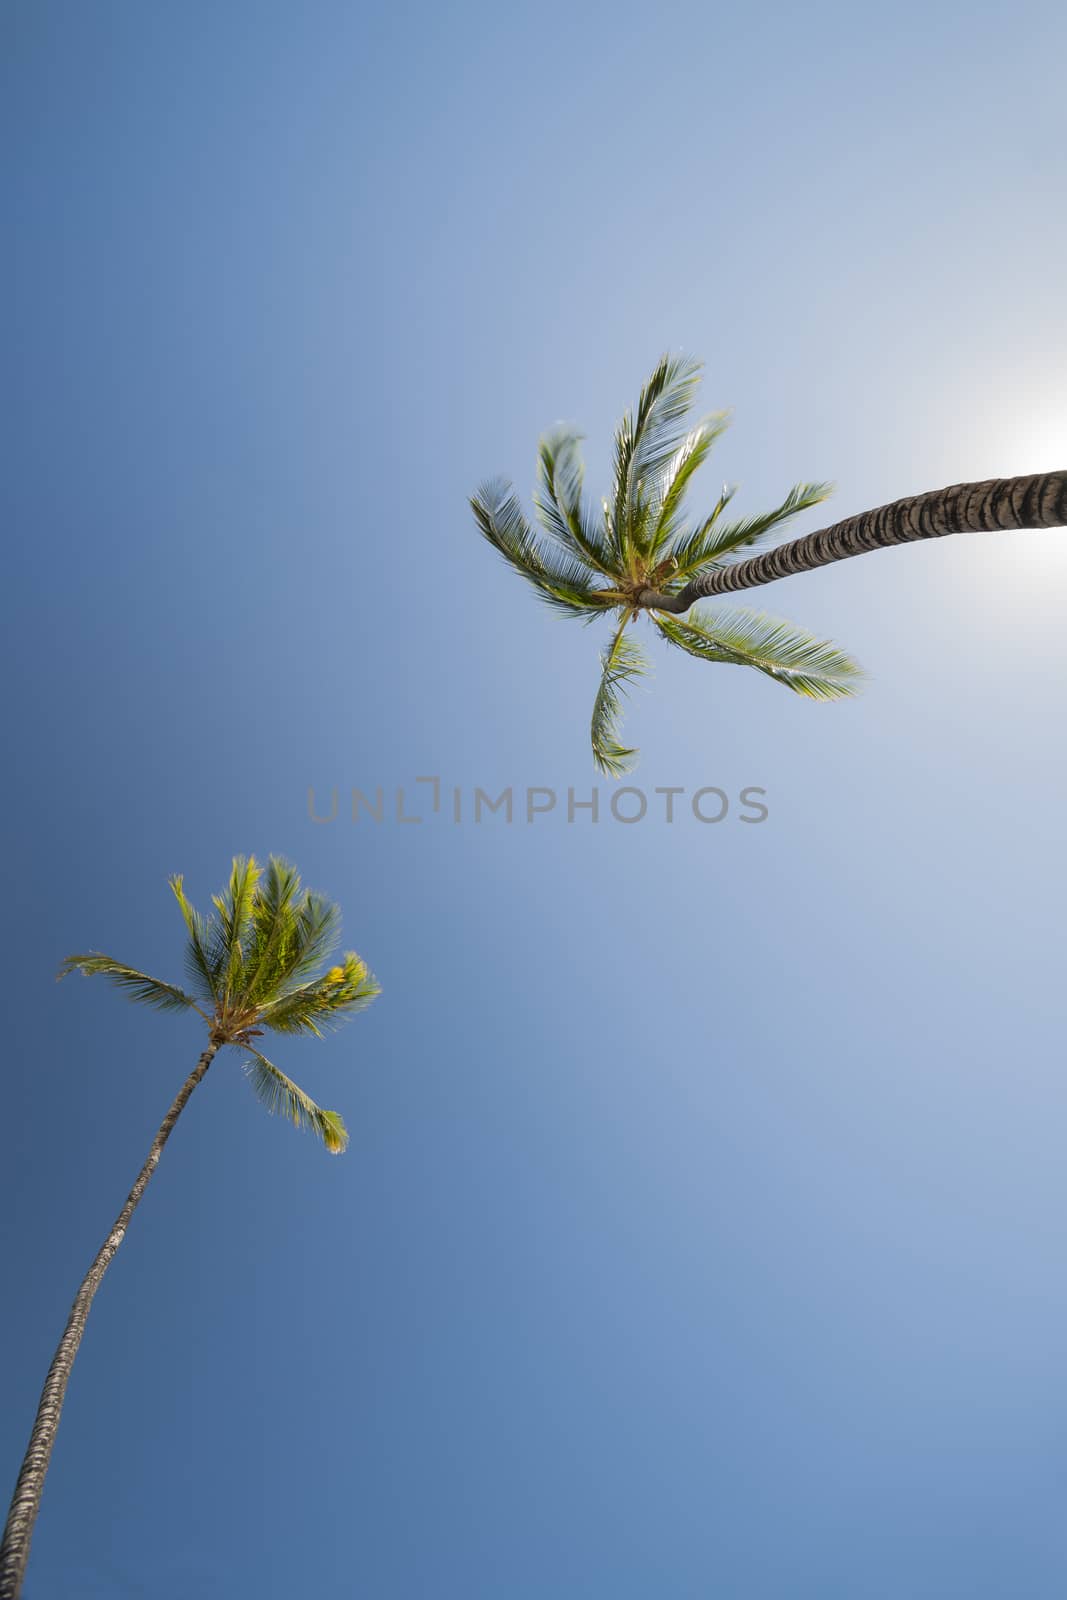 two Palm trees, low angle view against blue sky.